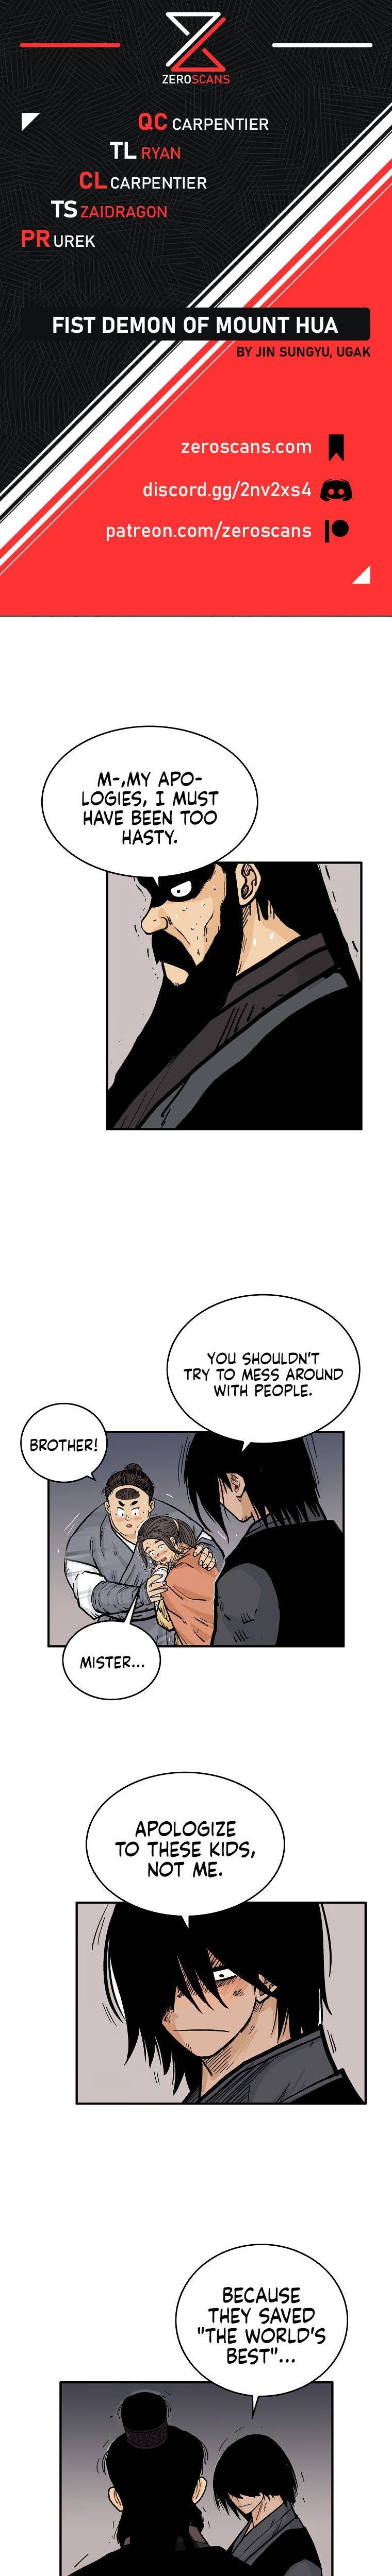 Fist Demon of Mount Hua Chapter 68 page 1